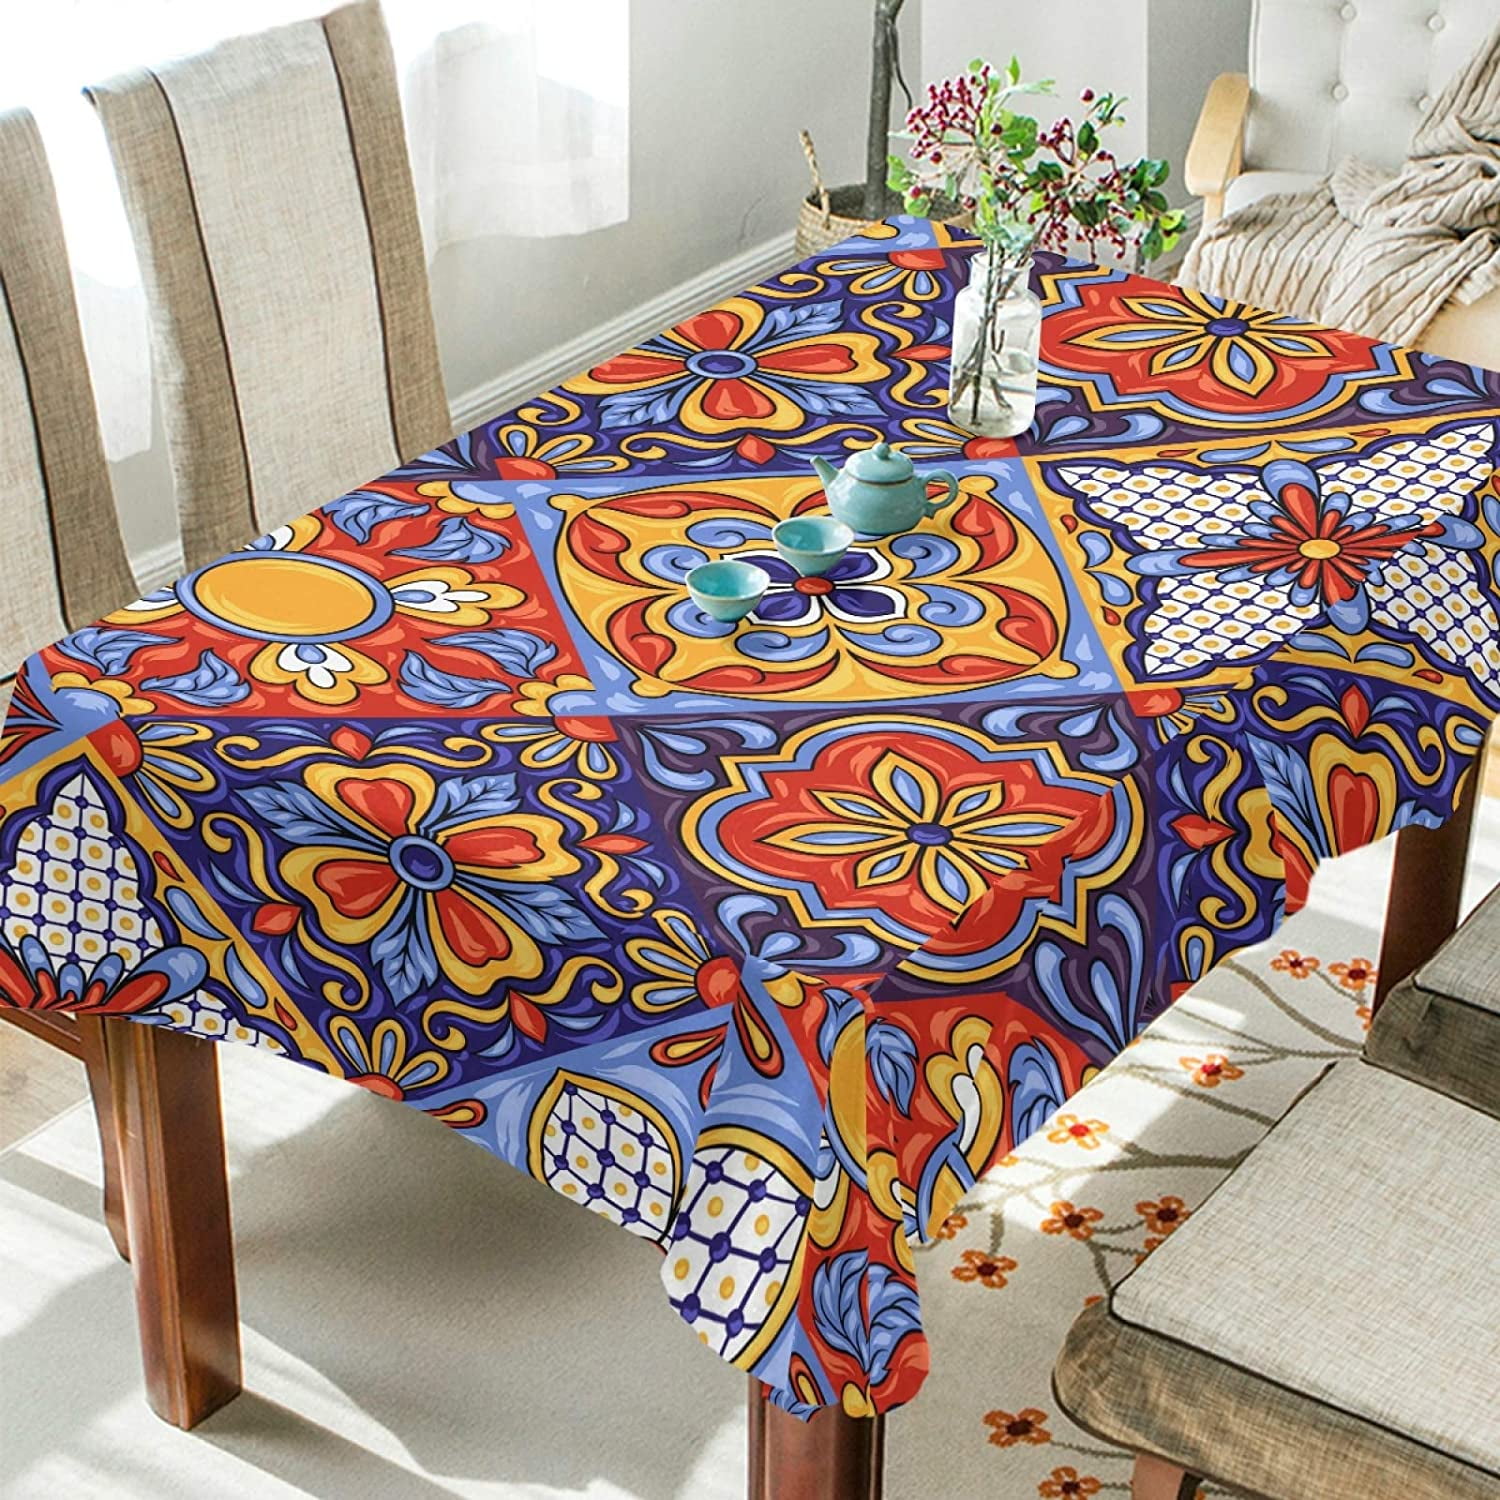 Colorful Flowers Qilmy Rectangle Tablecloth 60 x 120 Table Cloth Cover Tabletop Fabric for Outdoor Party Picnic Camping Restaurant